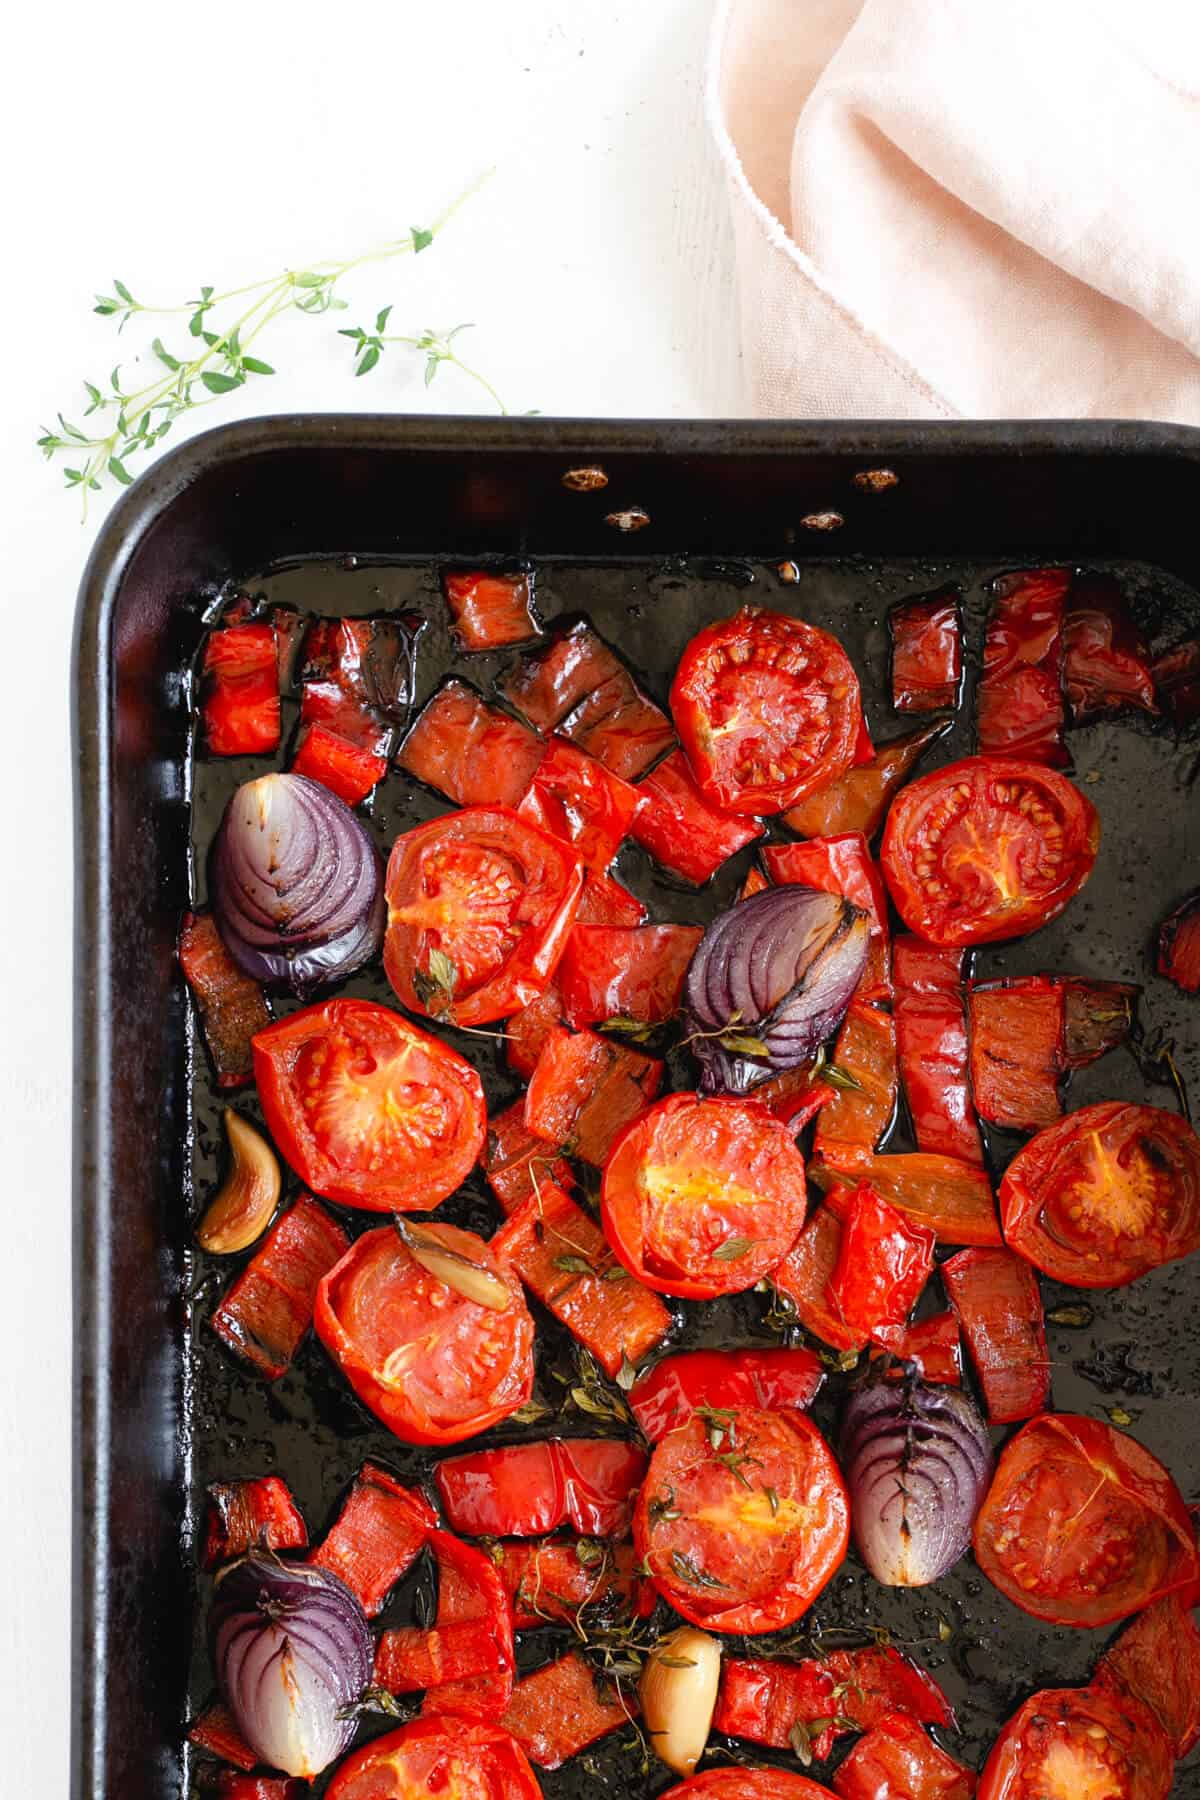 Roasted tomatoes, red peppers and red onions in a roasting tin